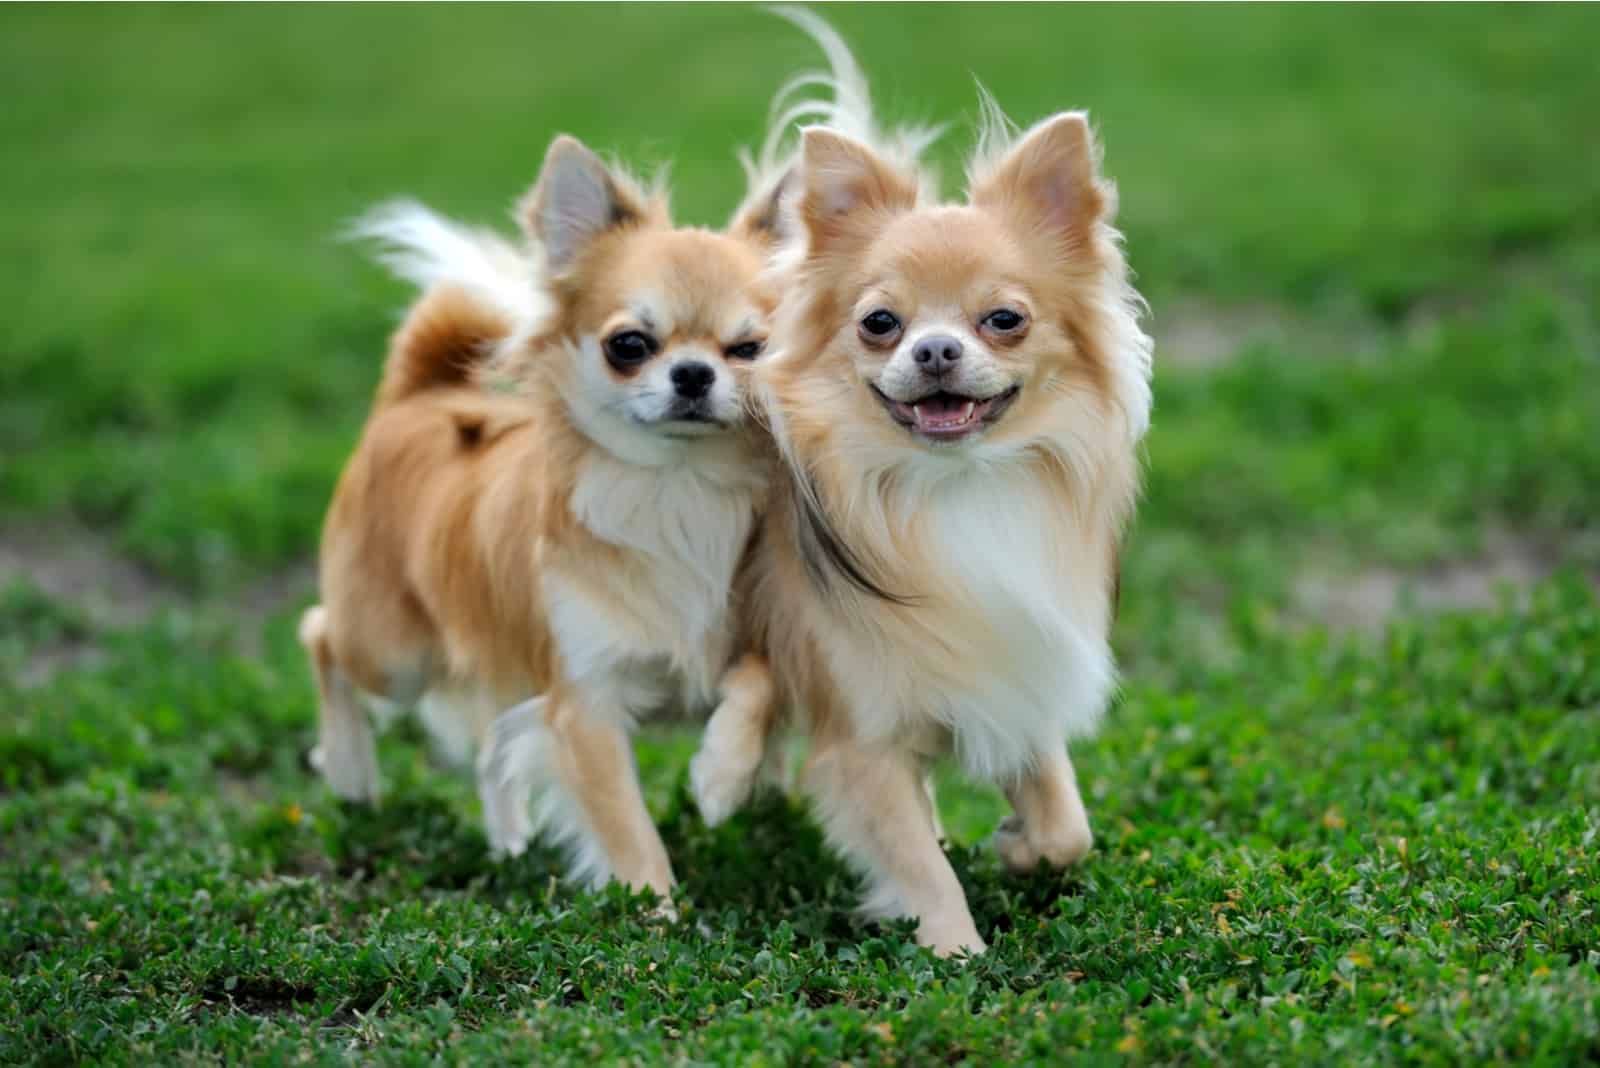 two Chihuahuas standing on grass